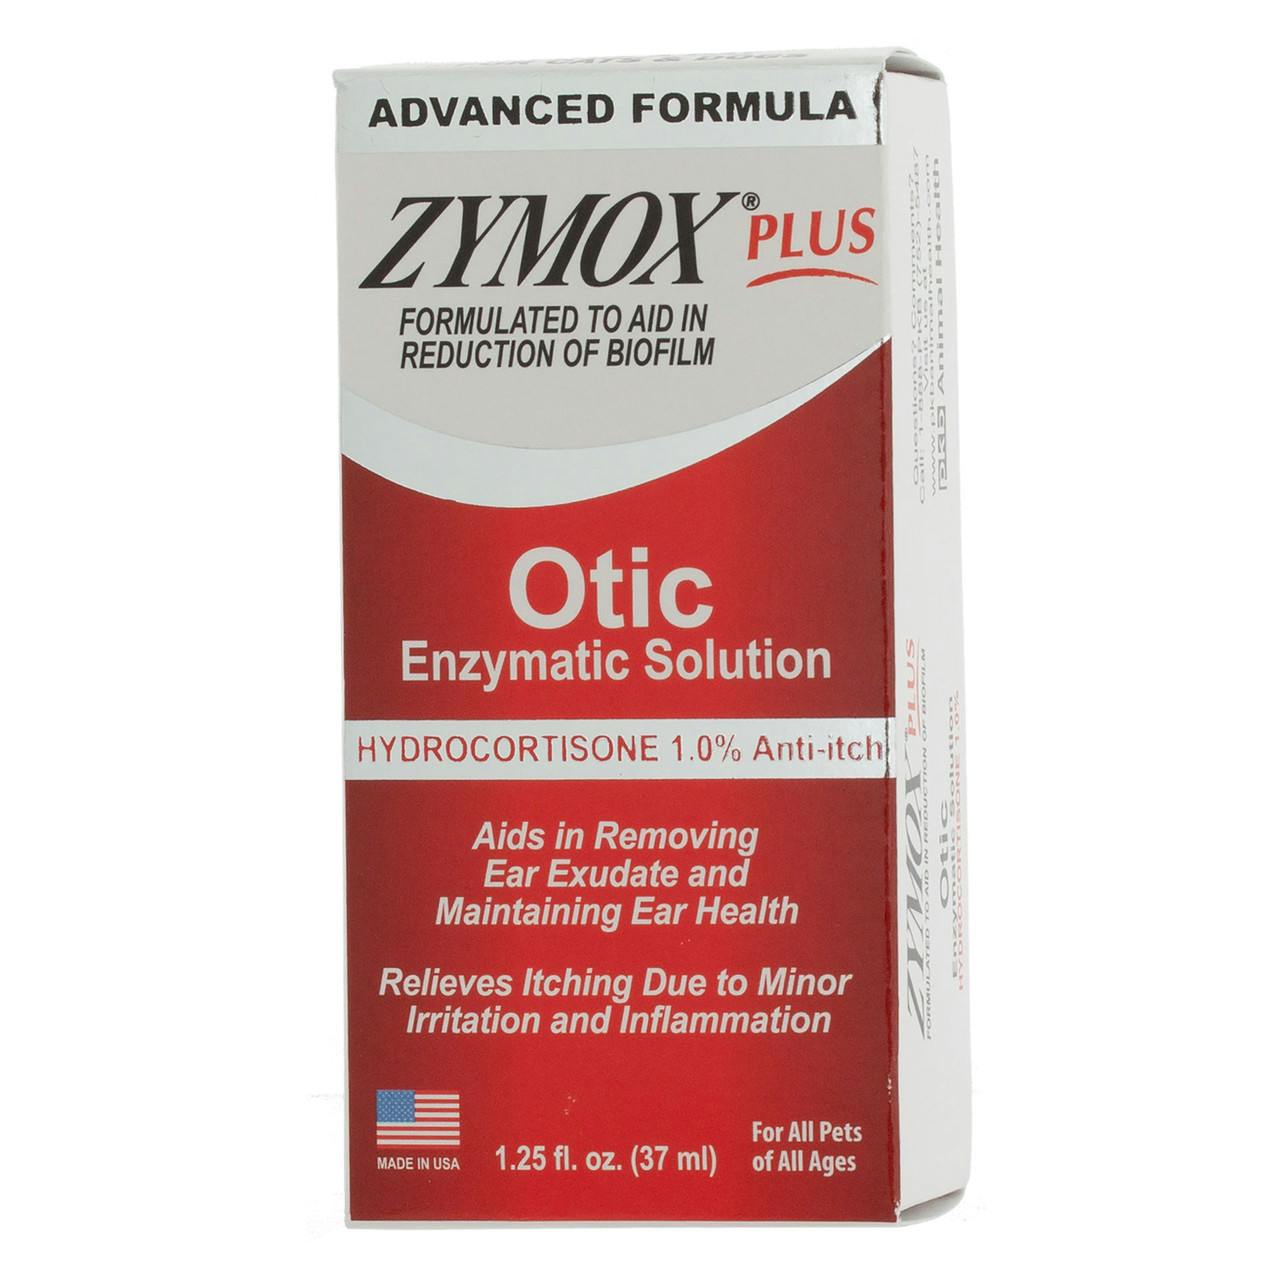 A red & white box says "Advanced Formula ZYMOX Plus Otic Enzymatic Solution". There's a red, white & blue flag in the corner.